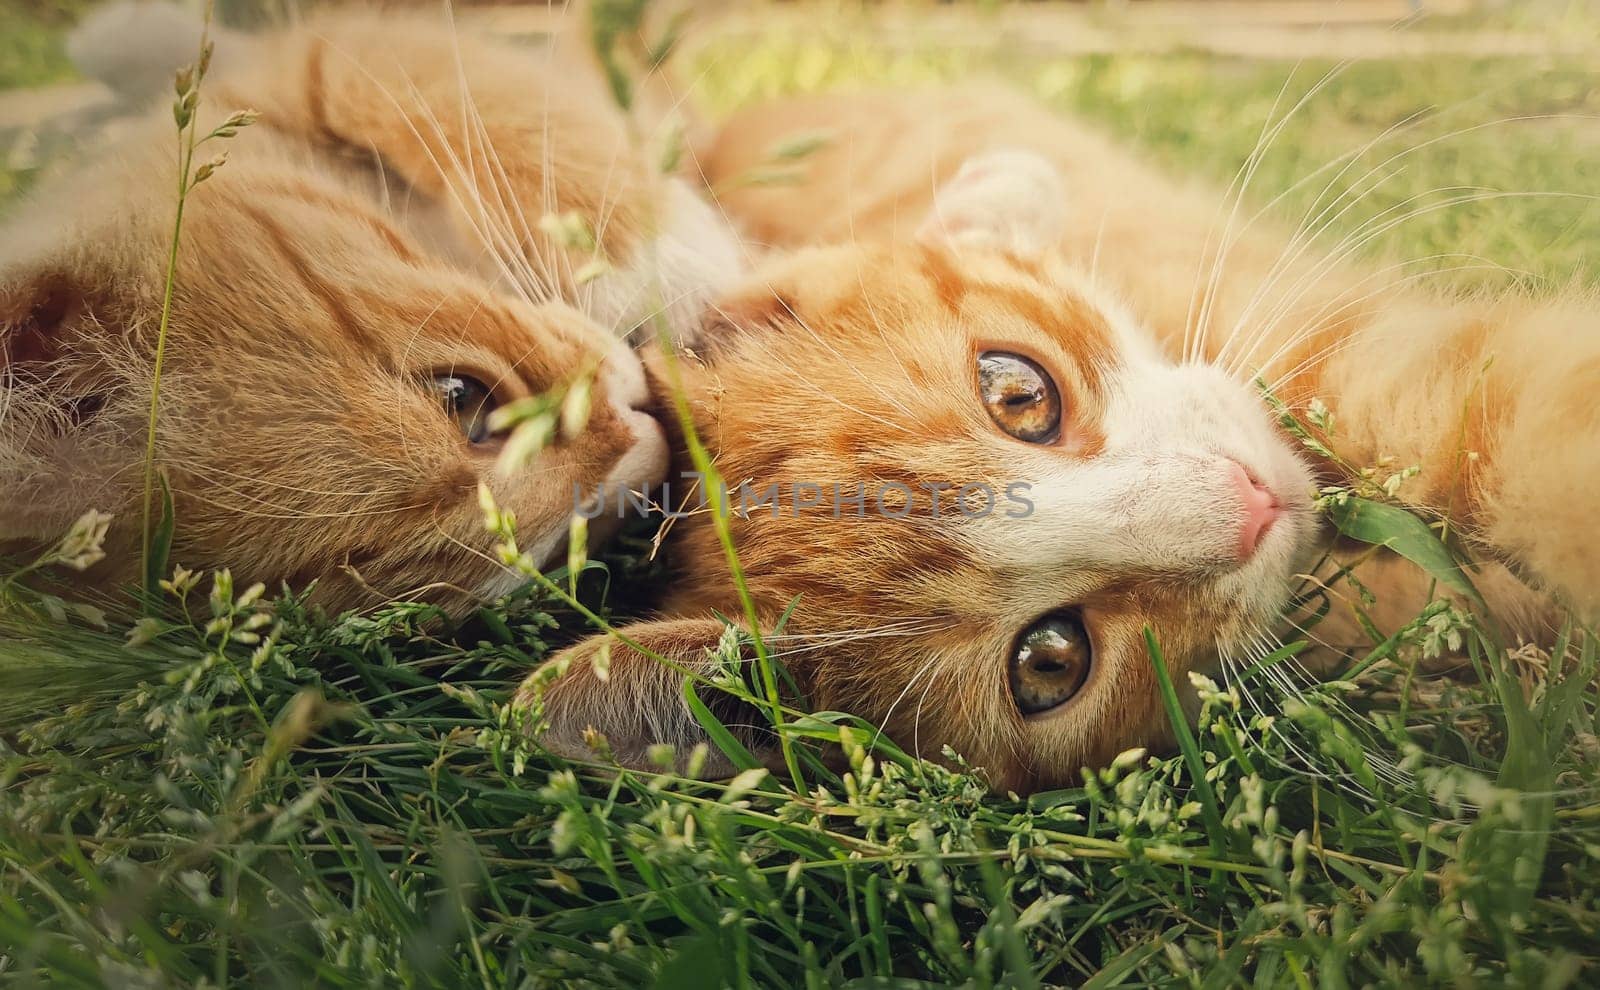 Two orange kittens playing together outdoors on the grass. Funny and playful ginger cats fighting games, biting and hugging